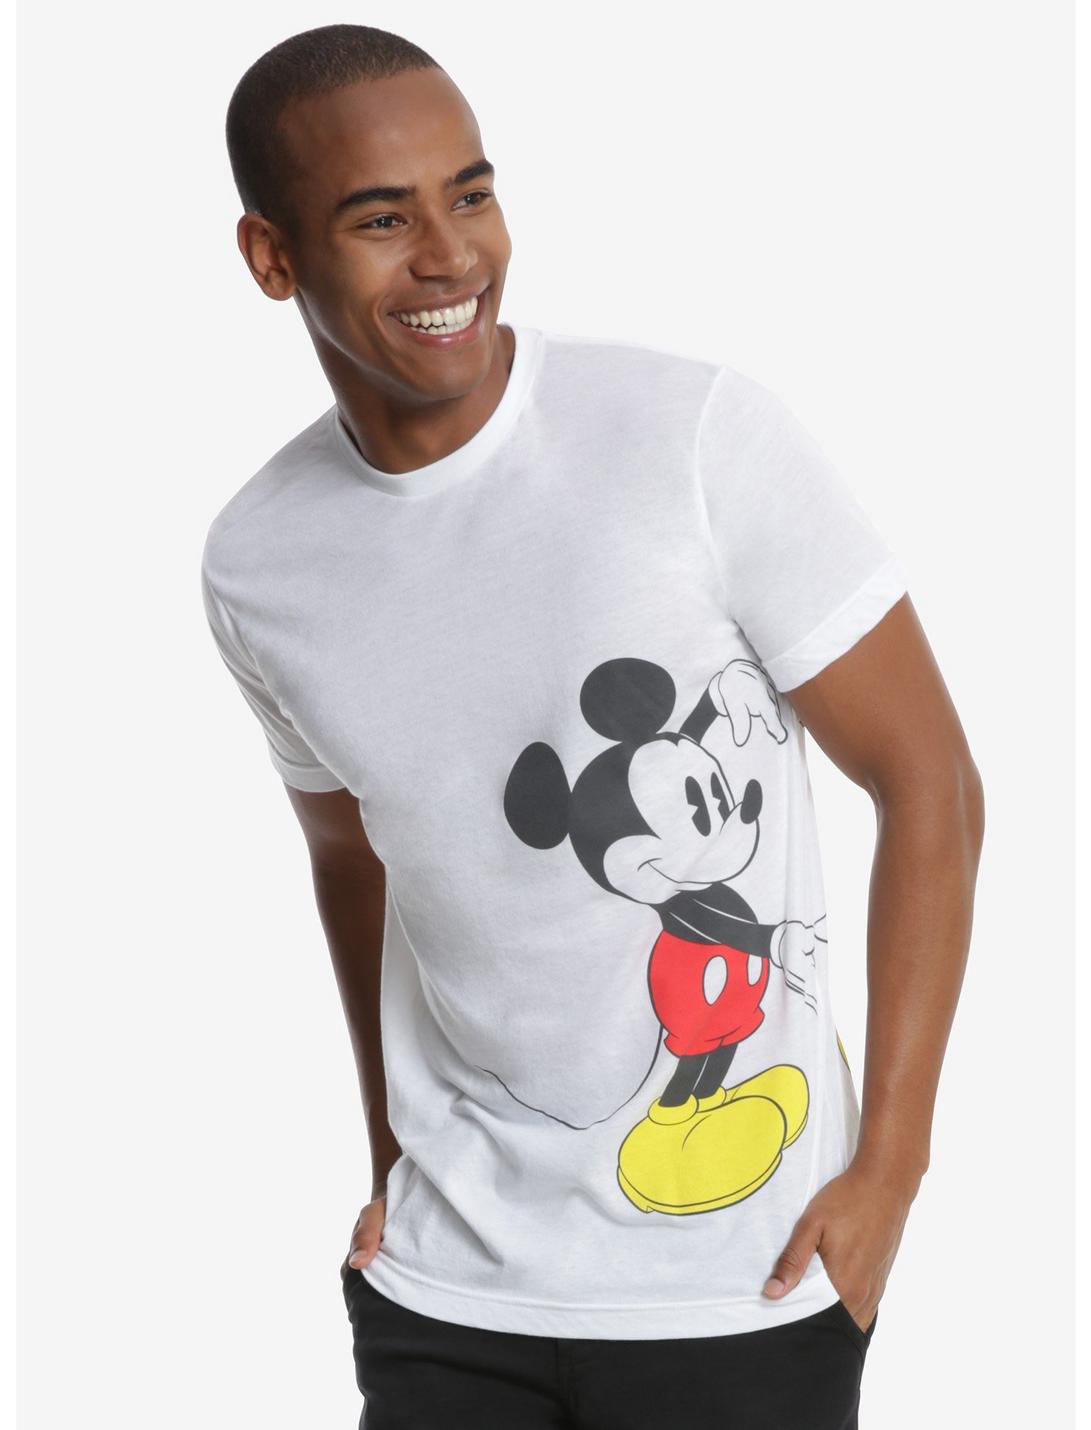 Disney Mickey Mouse Heart Arms T-Shirt, WHITE, hi-res